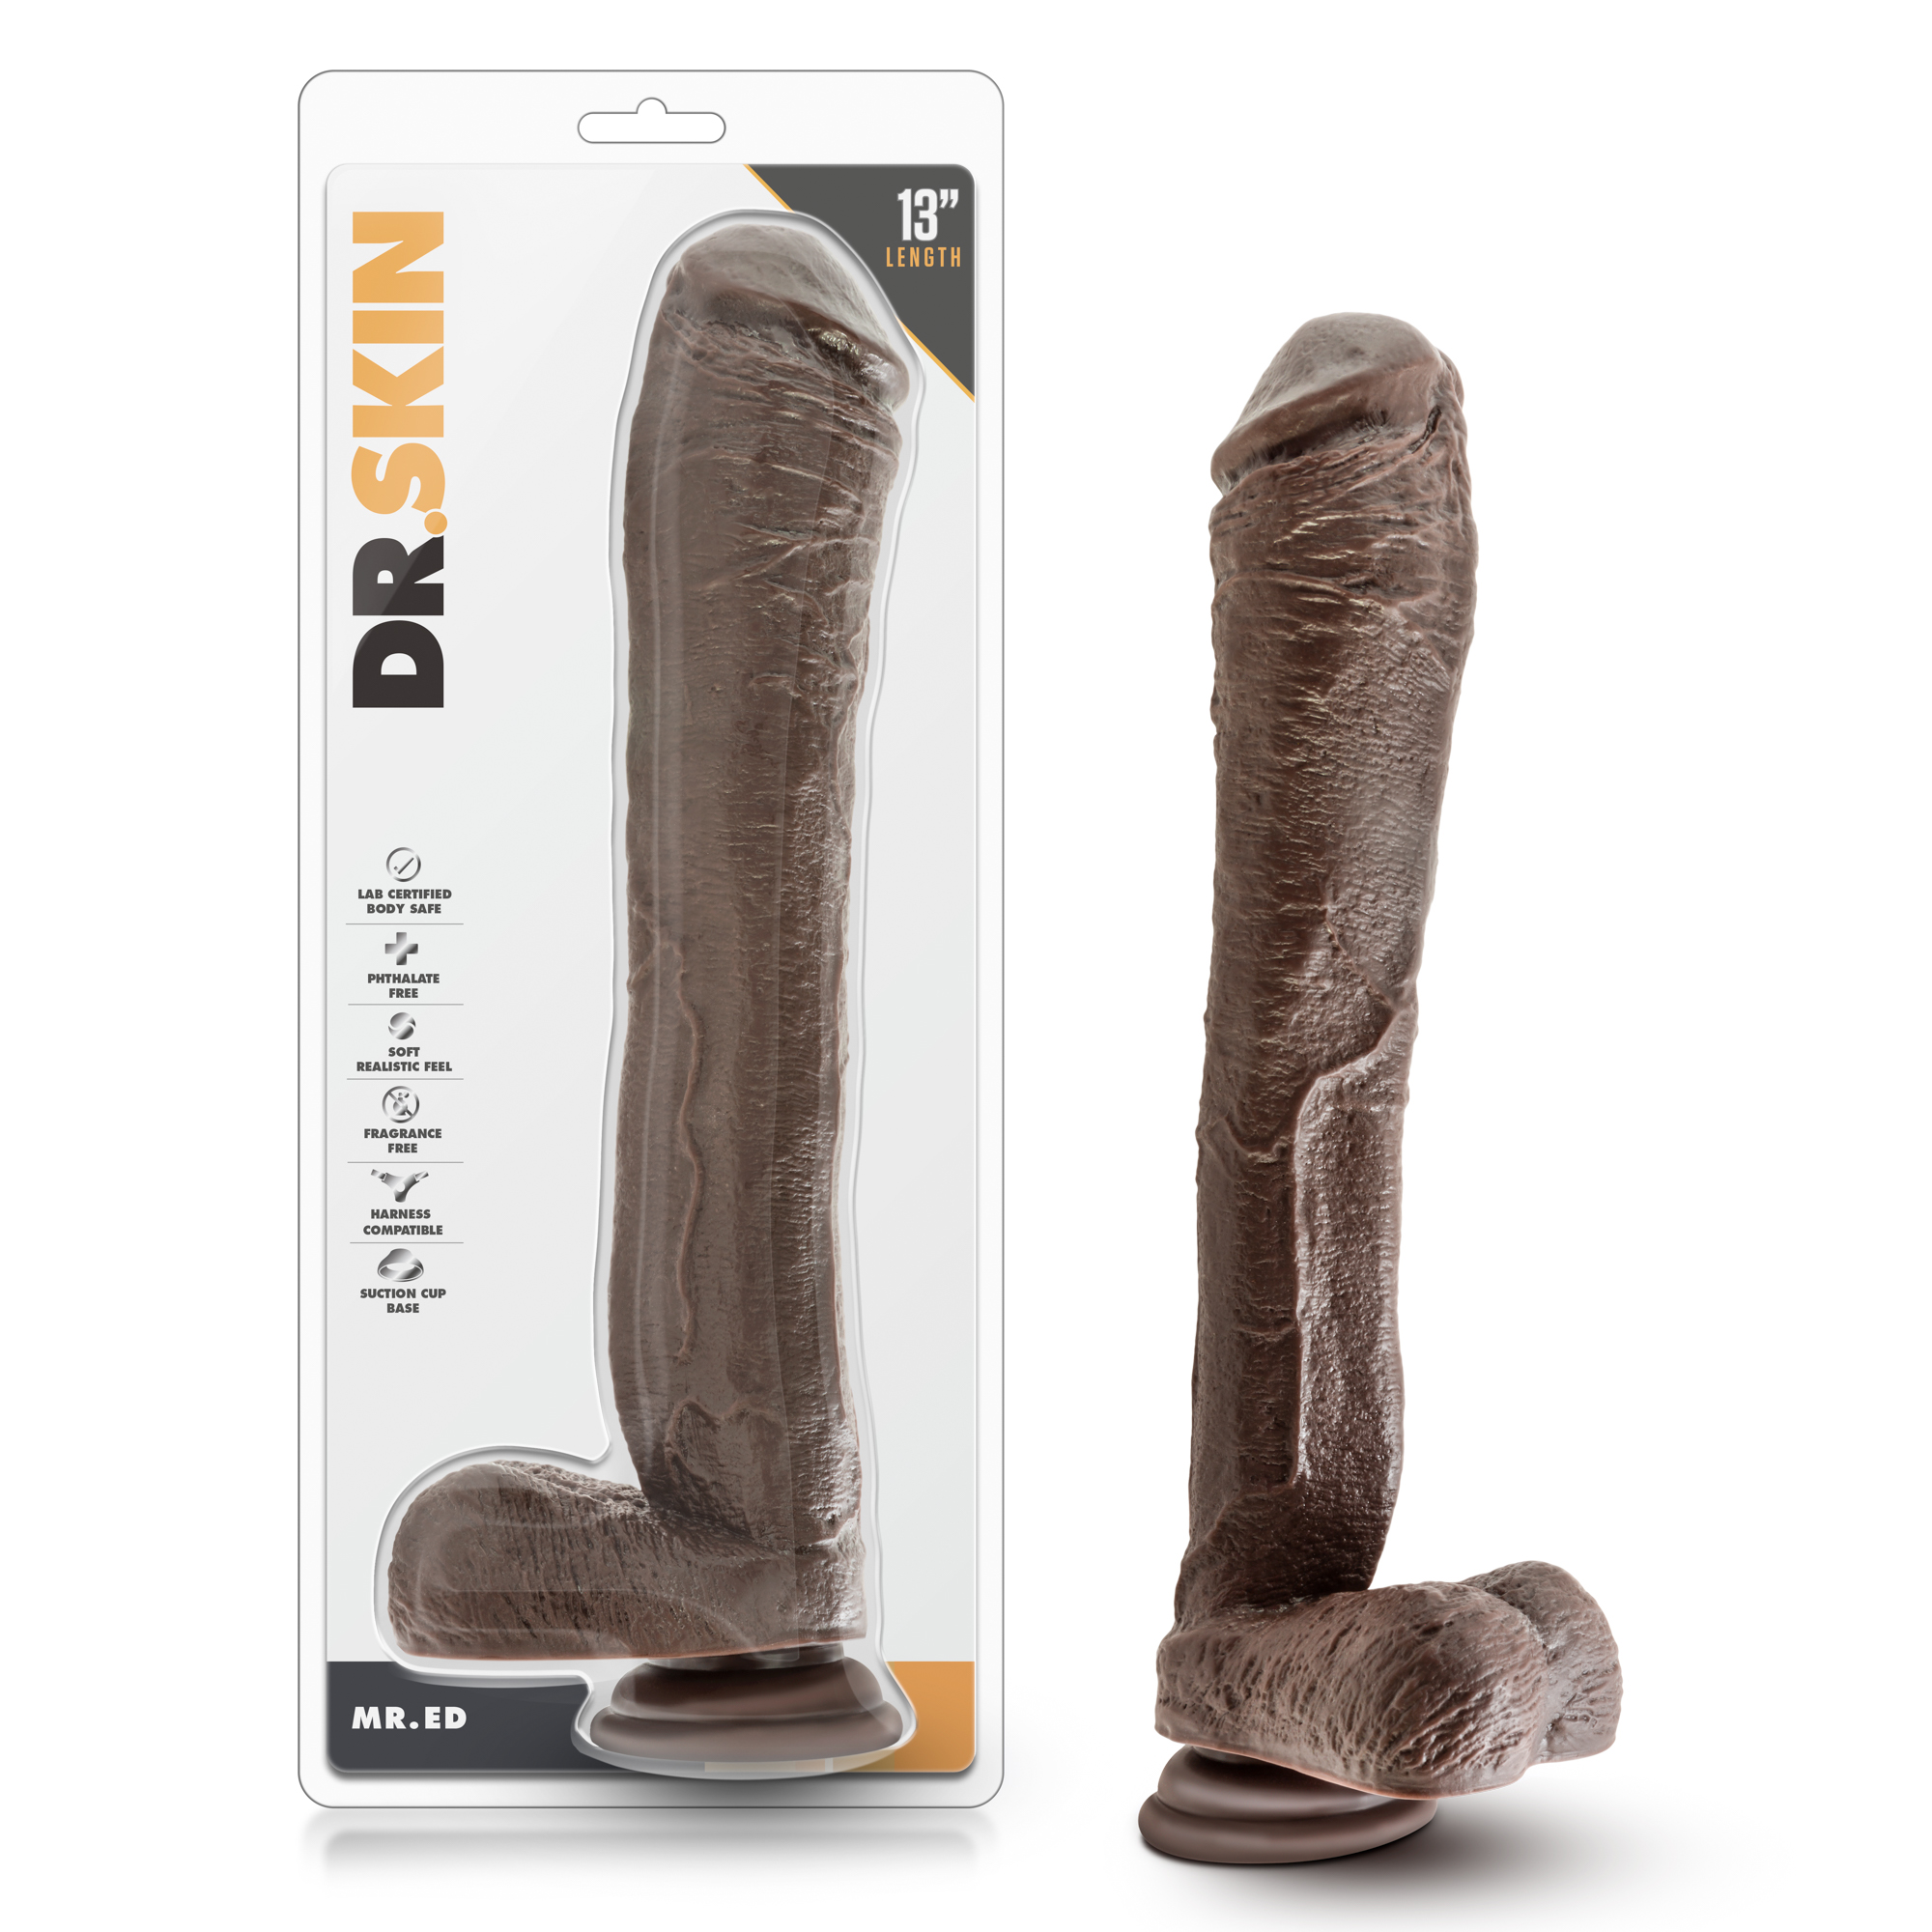 Dr. Skin - Mr. Ed 13 Inch Dildo with Suction Cup - Chocolate.